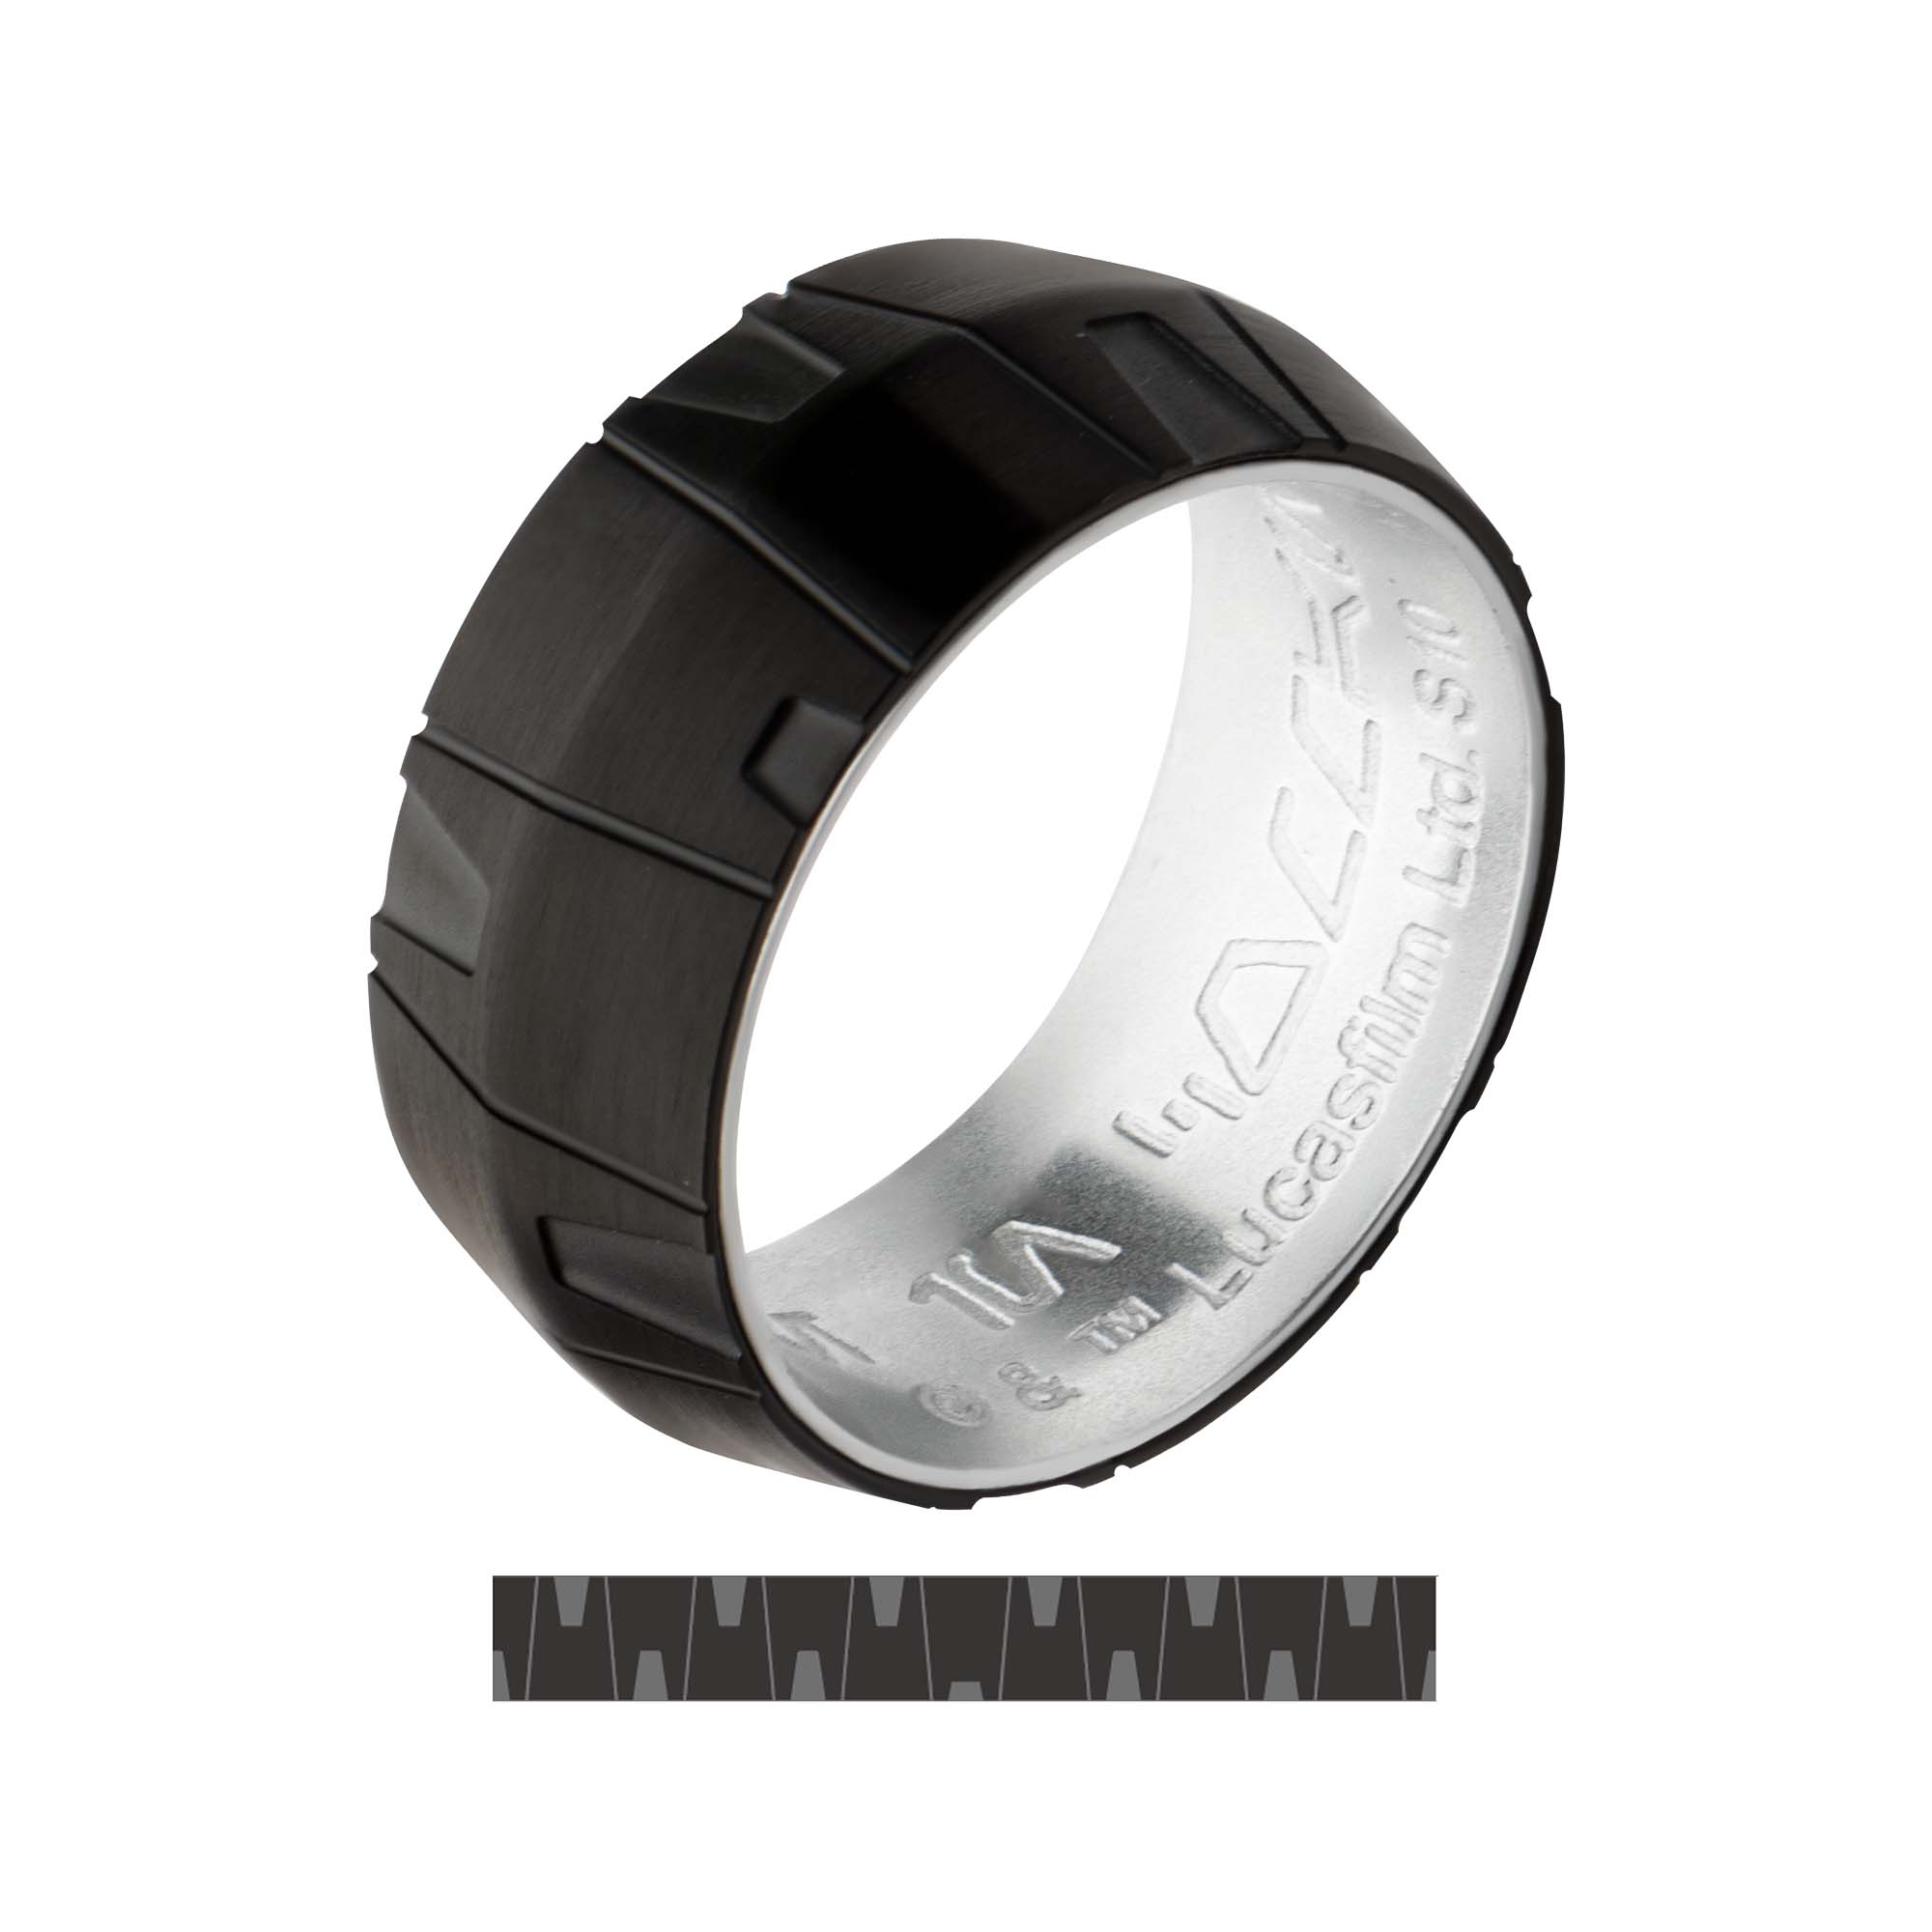 Star Wars Vader Steel Meditation Chamber “You Are In Command Now” Ring